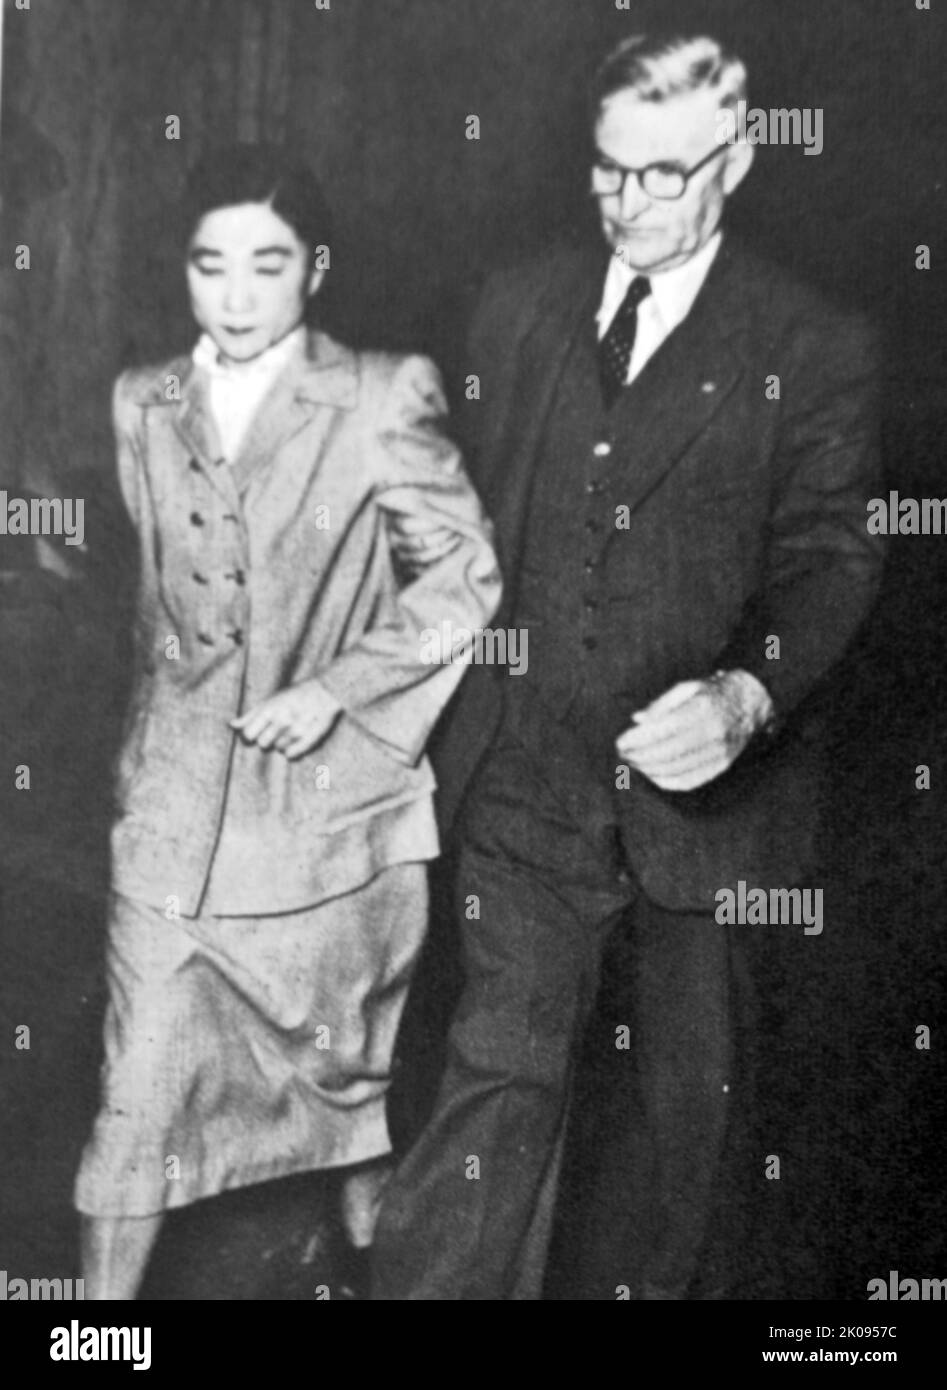 Trial of Iva Ikuko Toguri D'Aquino (July 4, 1916 - September 26, 2006) was an American who participated in English-language radio broadcasts transmitted by Radio Tokyo to Allied soldiers in the South Pacific during World War II on The Zero Hour radio show. She was subsequently charged by the United States Attorney's Office with eight counts of treason. Her 1949 trial resulted in a conviction on one count, for which she spent more than six years out of a ten-year sentence in prison. Stock Photo